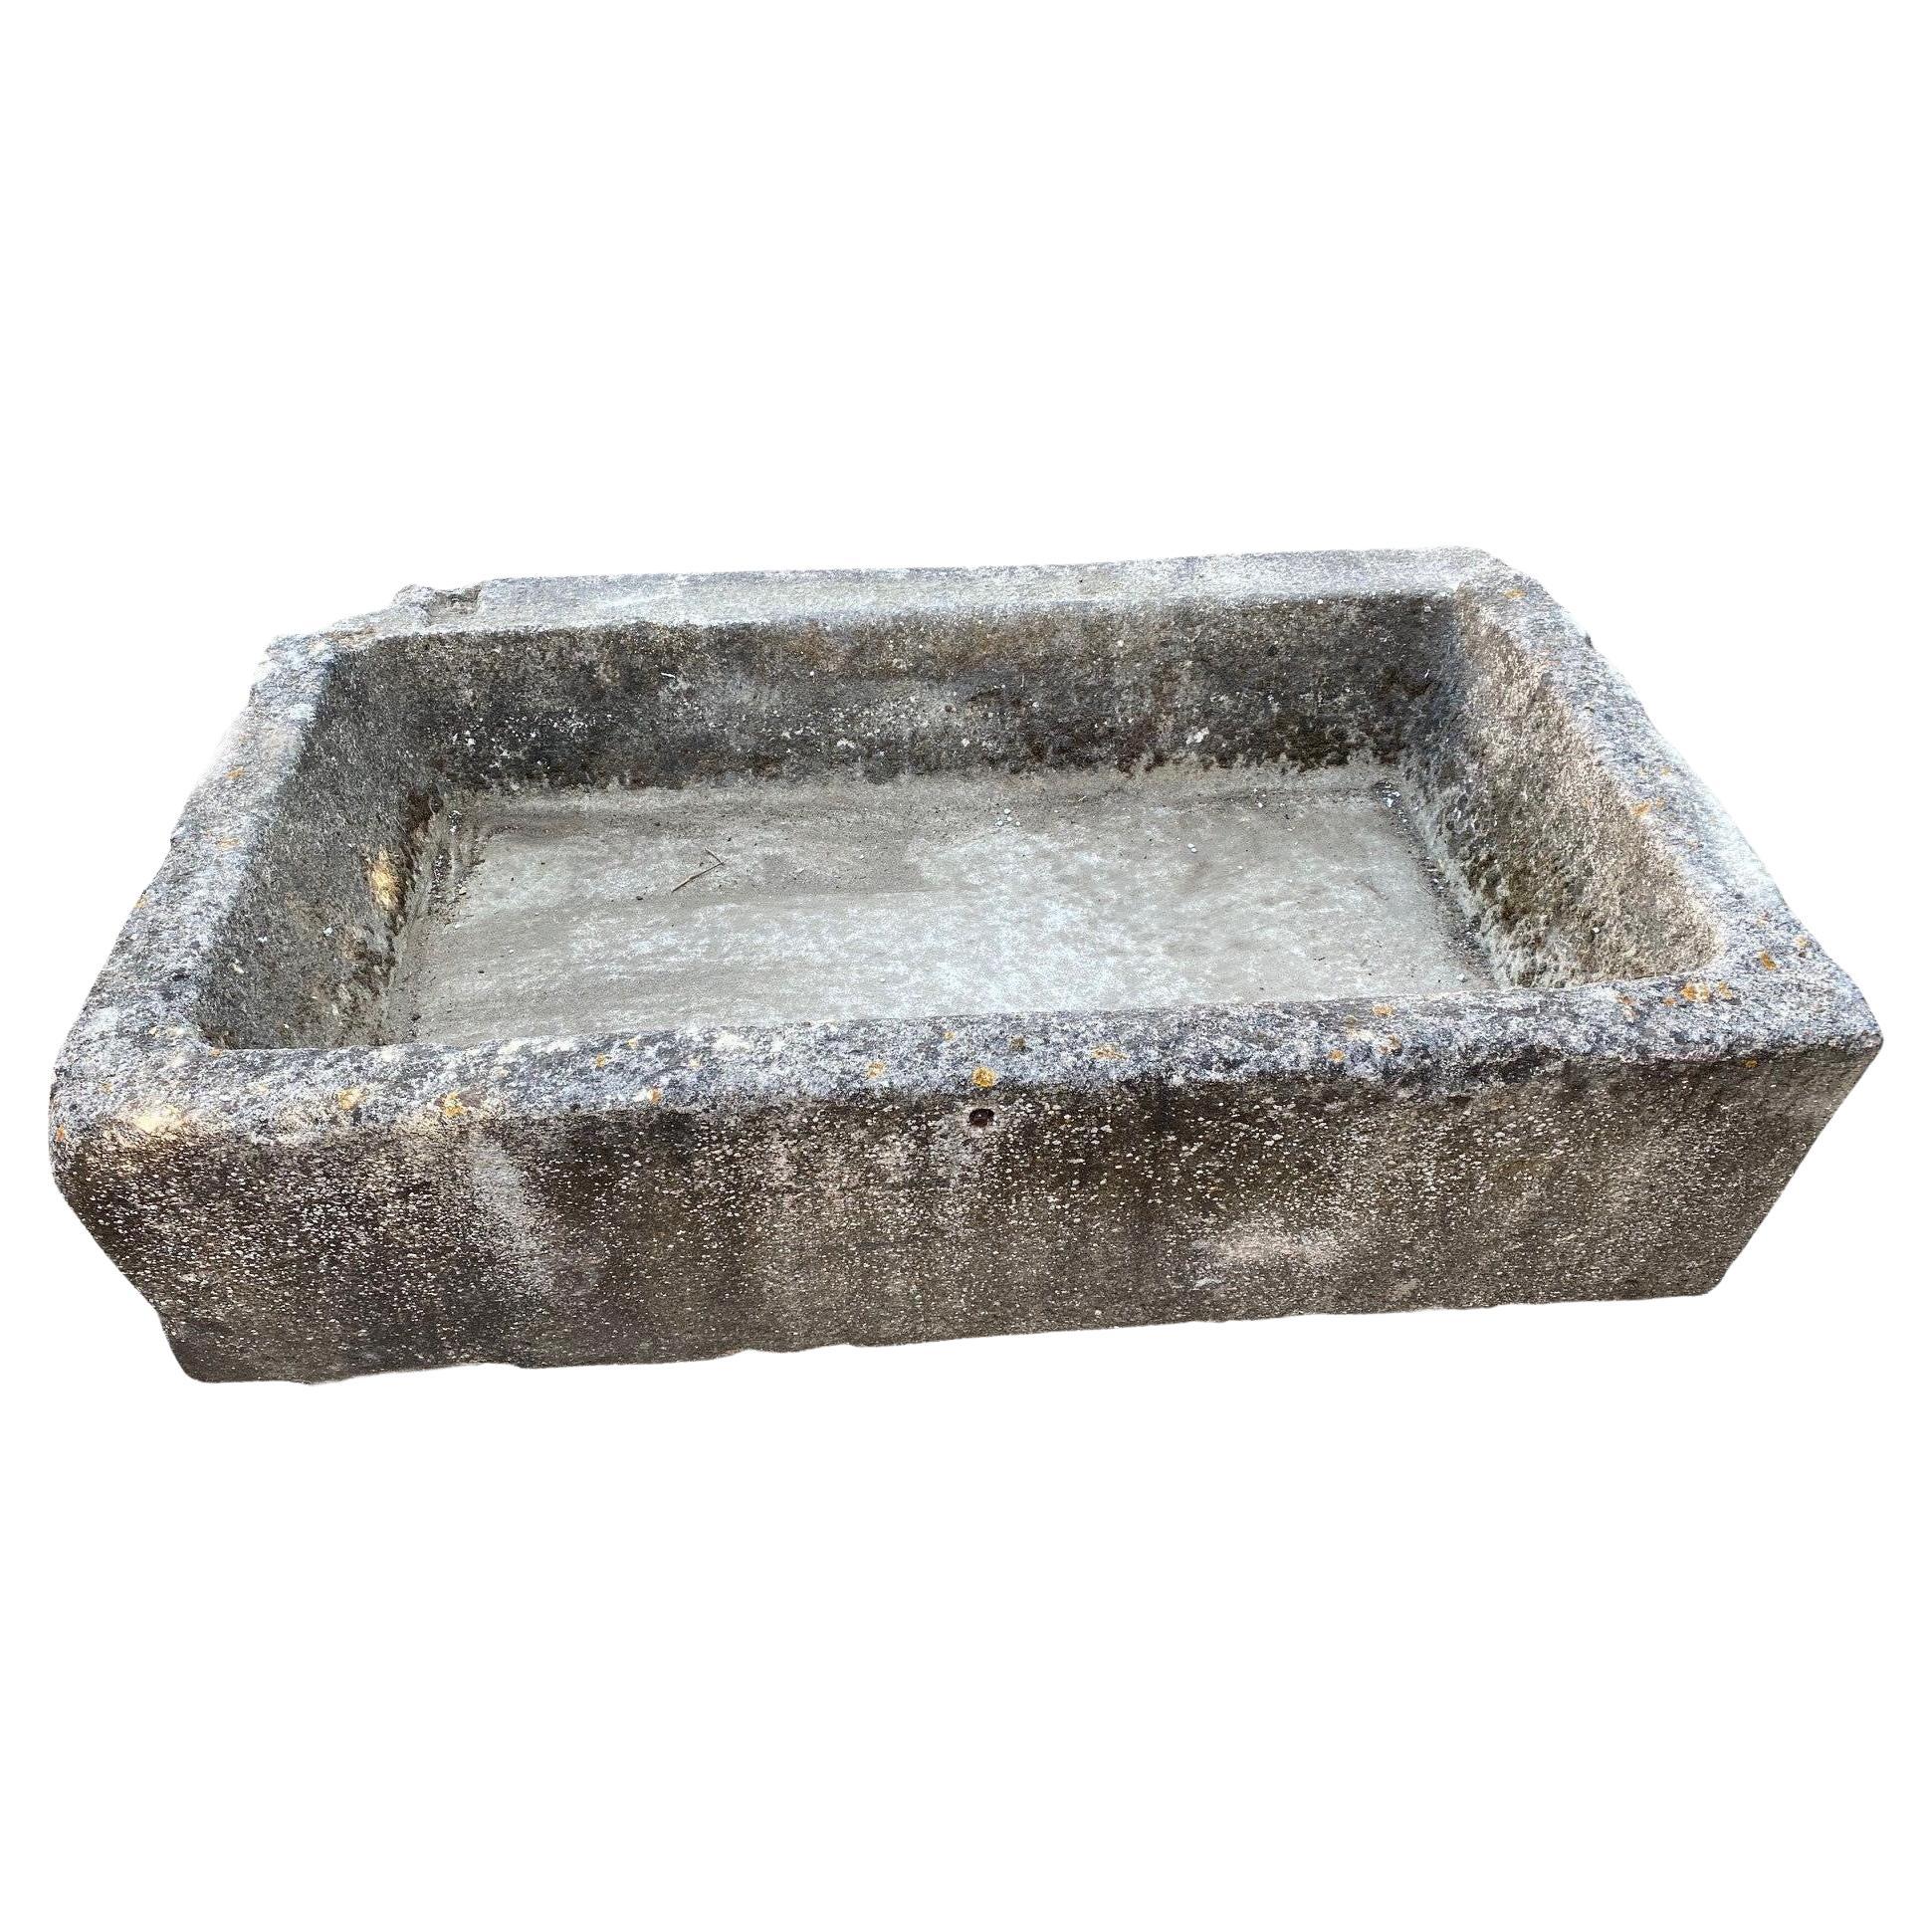 Hand Carved Stone Trough Fountain Basin Tub Planter Firepit Container Antique LA For Sale